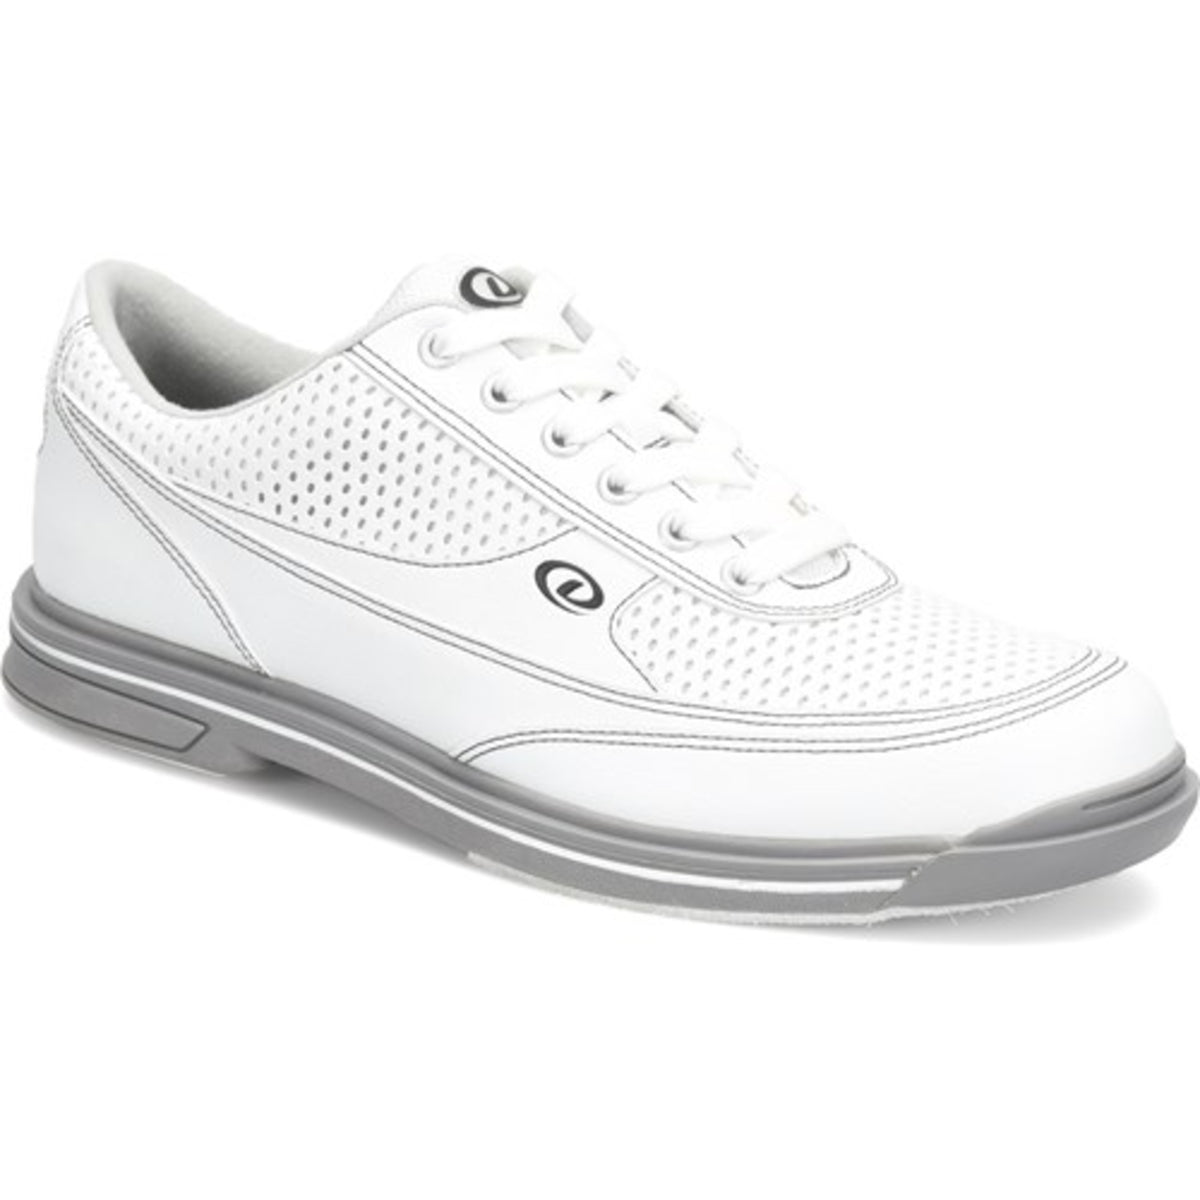 Turbo Pro White/Grey Wide Shoes